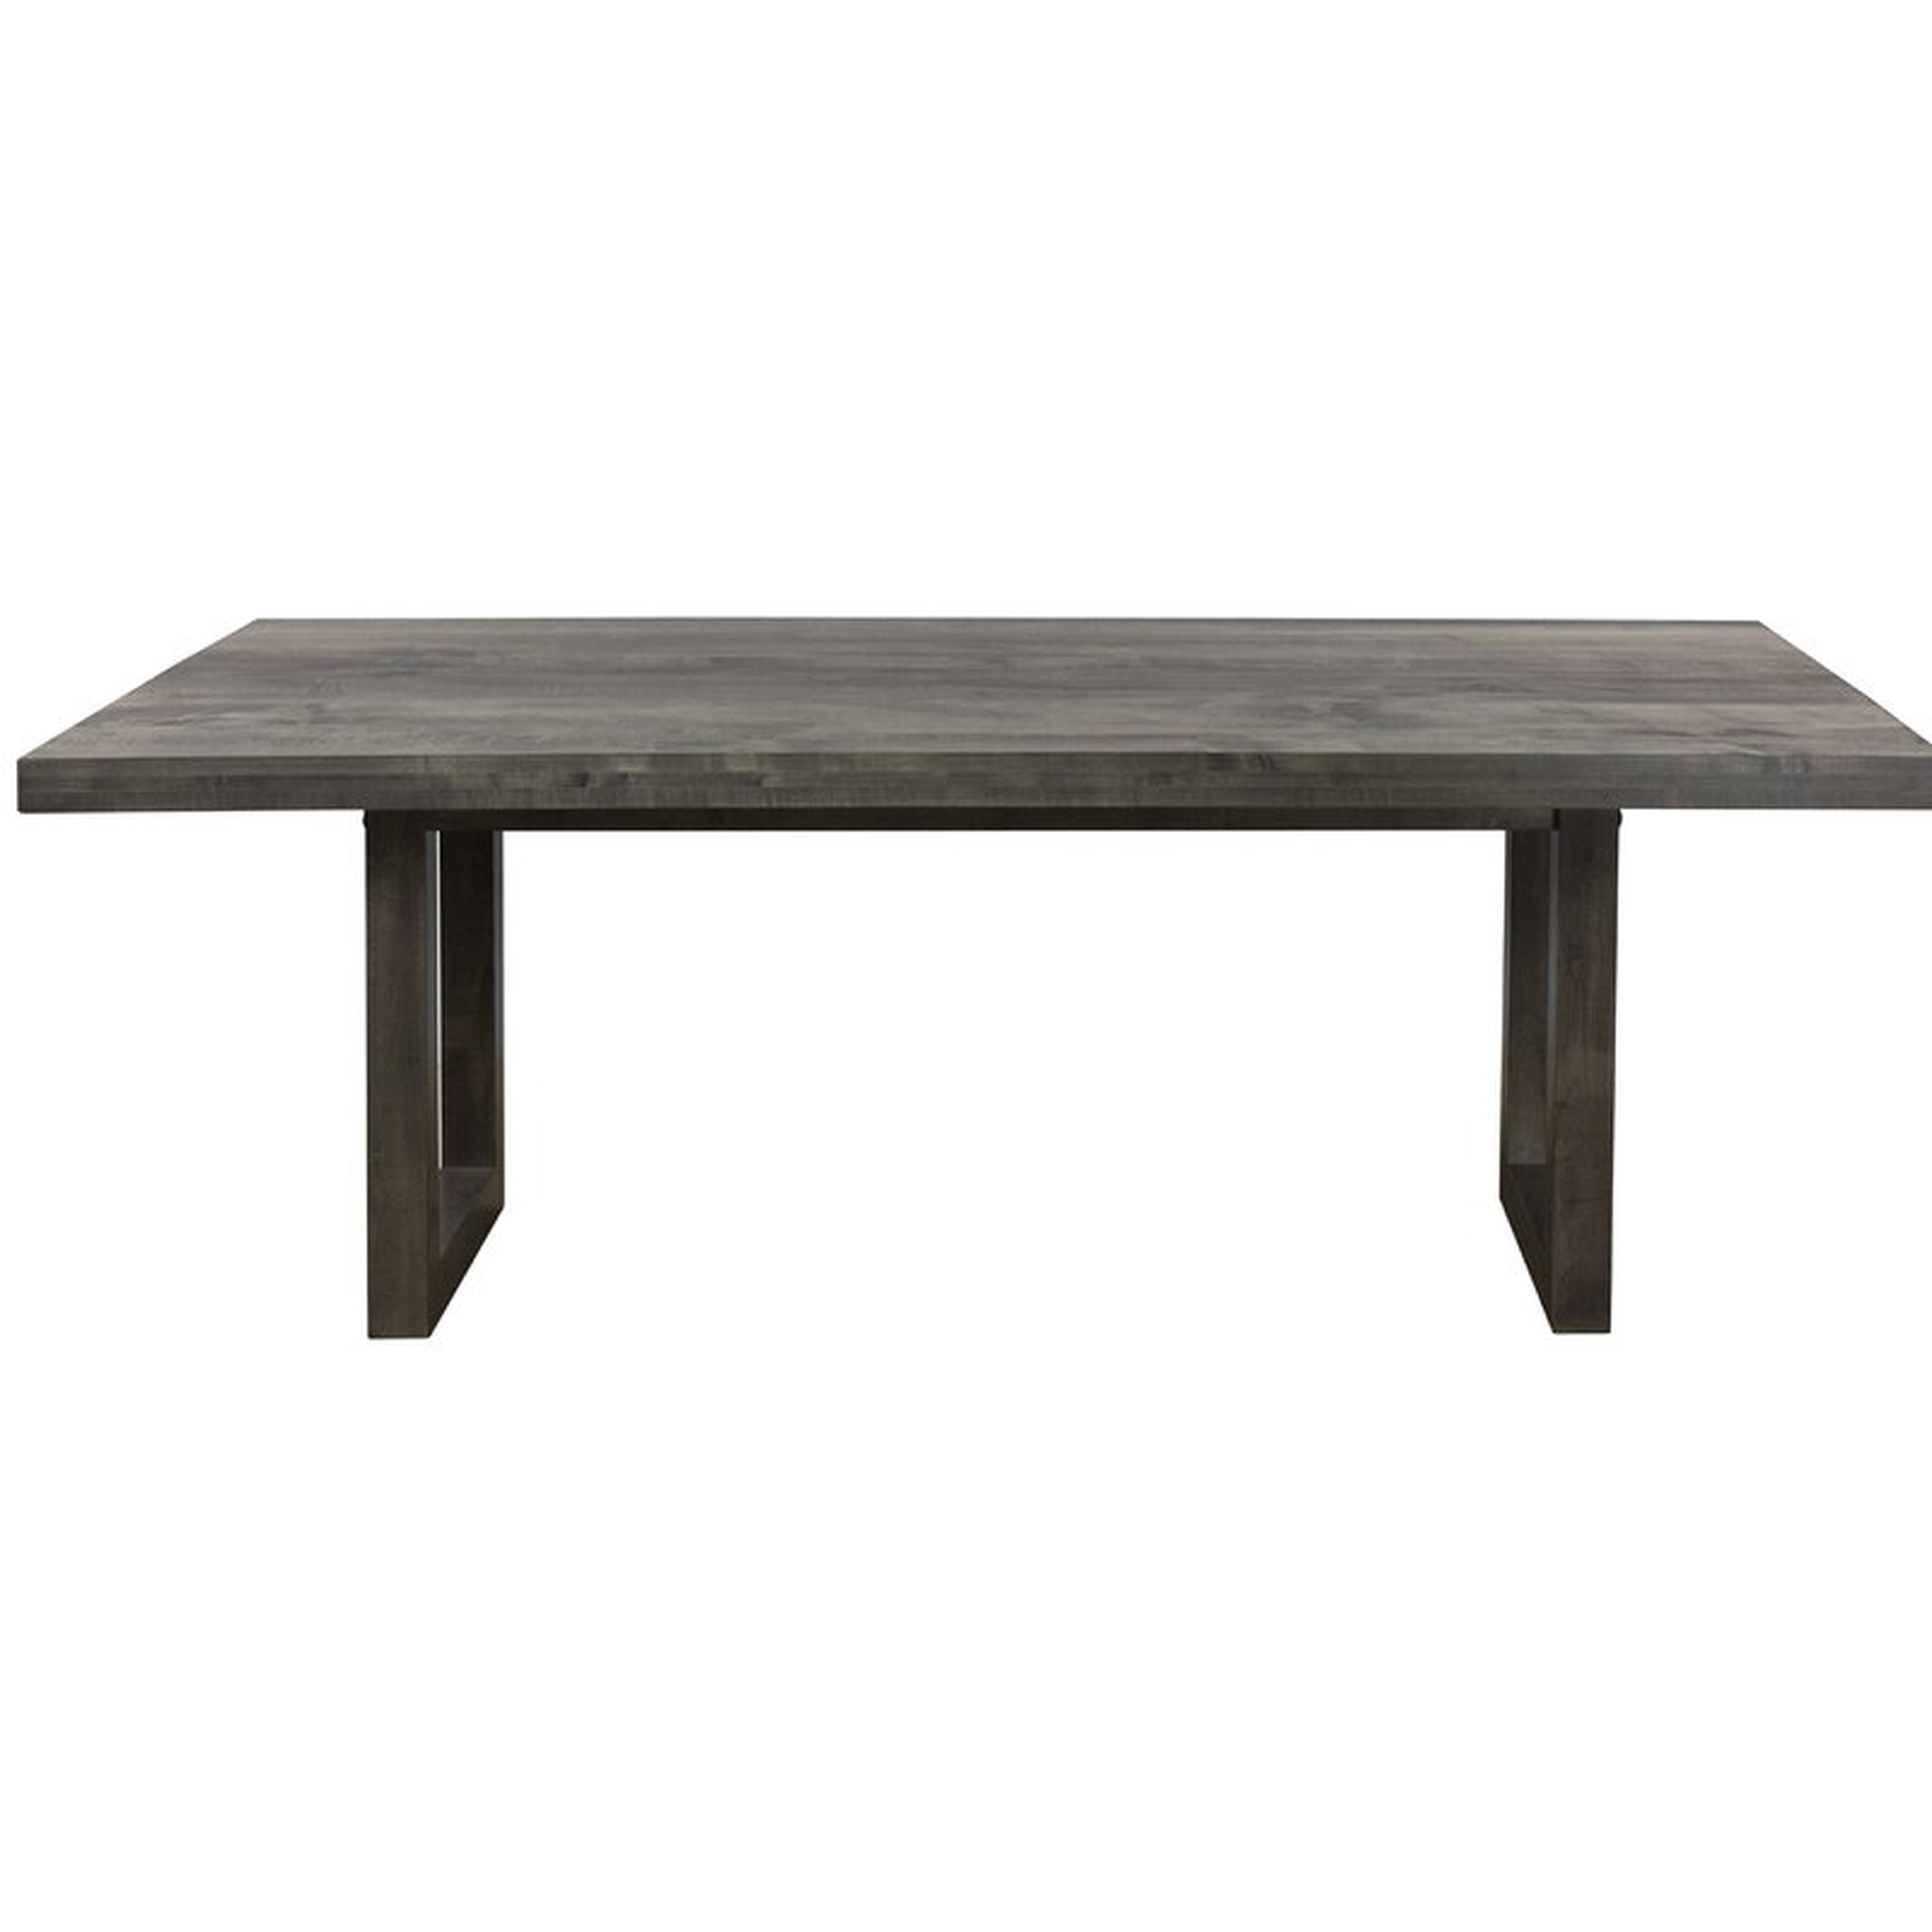 Saloom Furniture Oracle Emerson Dining Table - Perigold